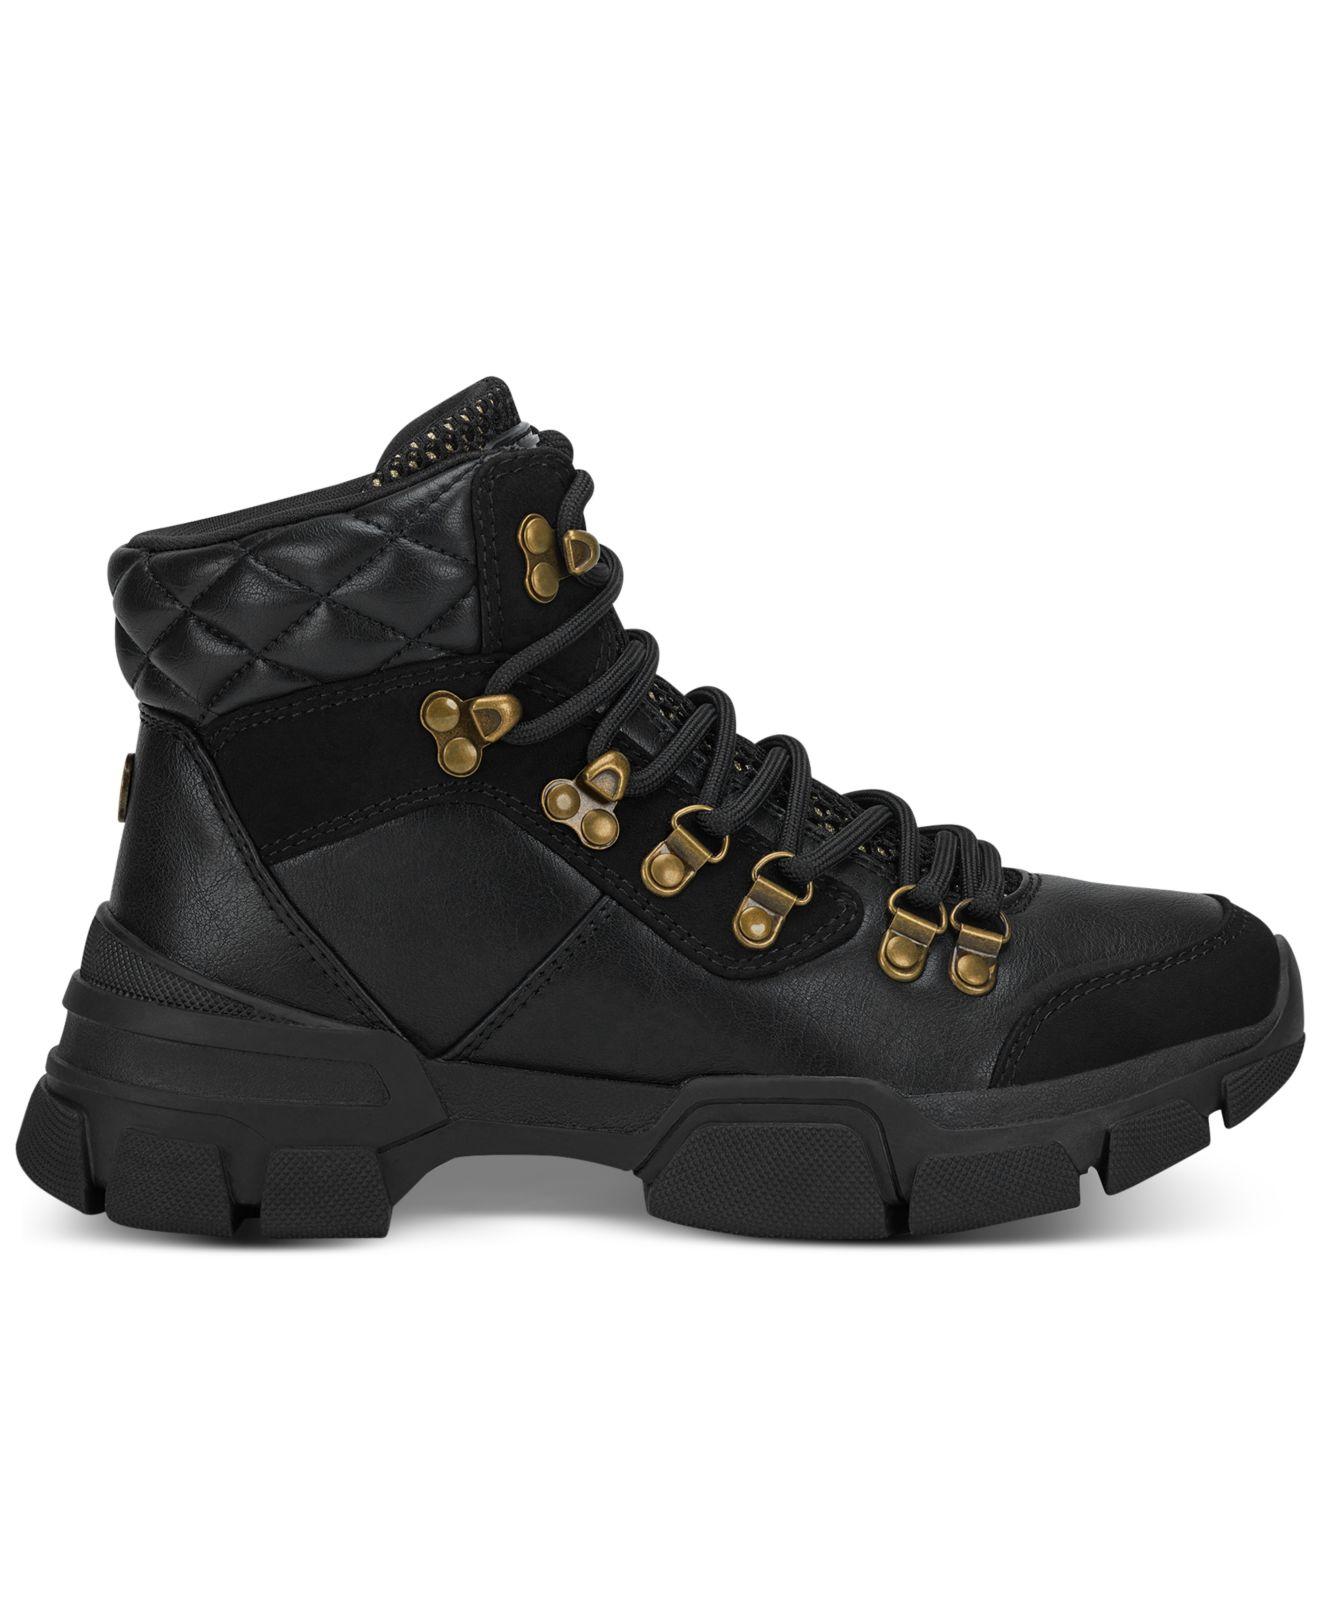 G by Guess Gbg Los Angeles Kix Hiker Boots in Black | Lyst